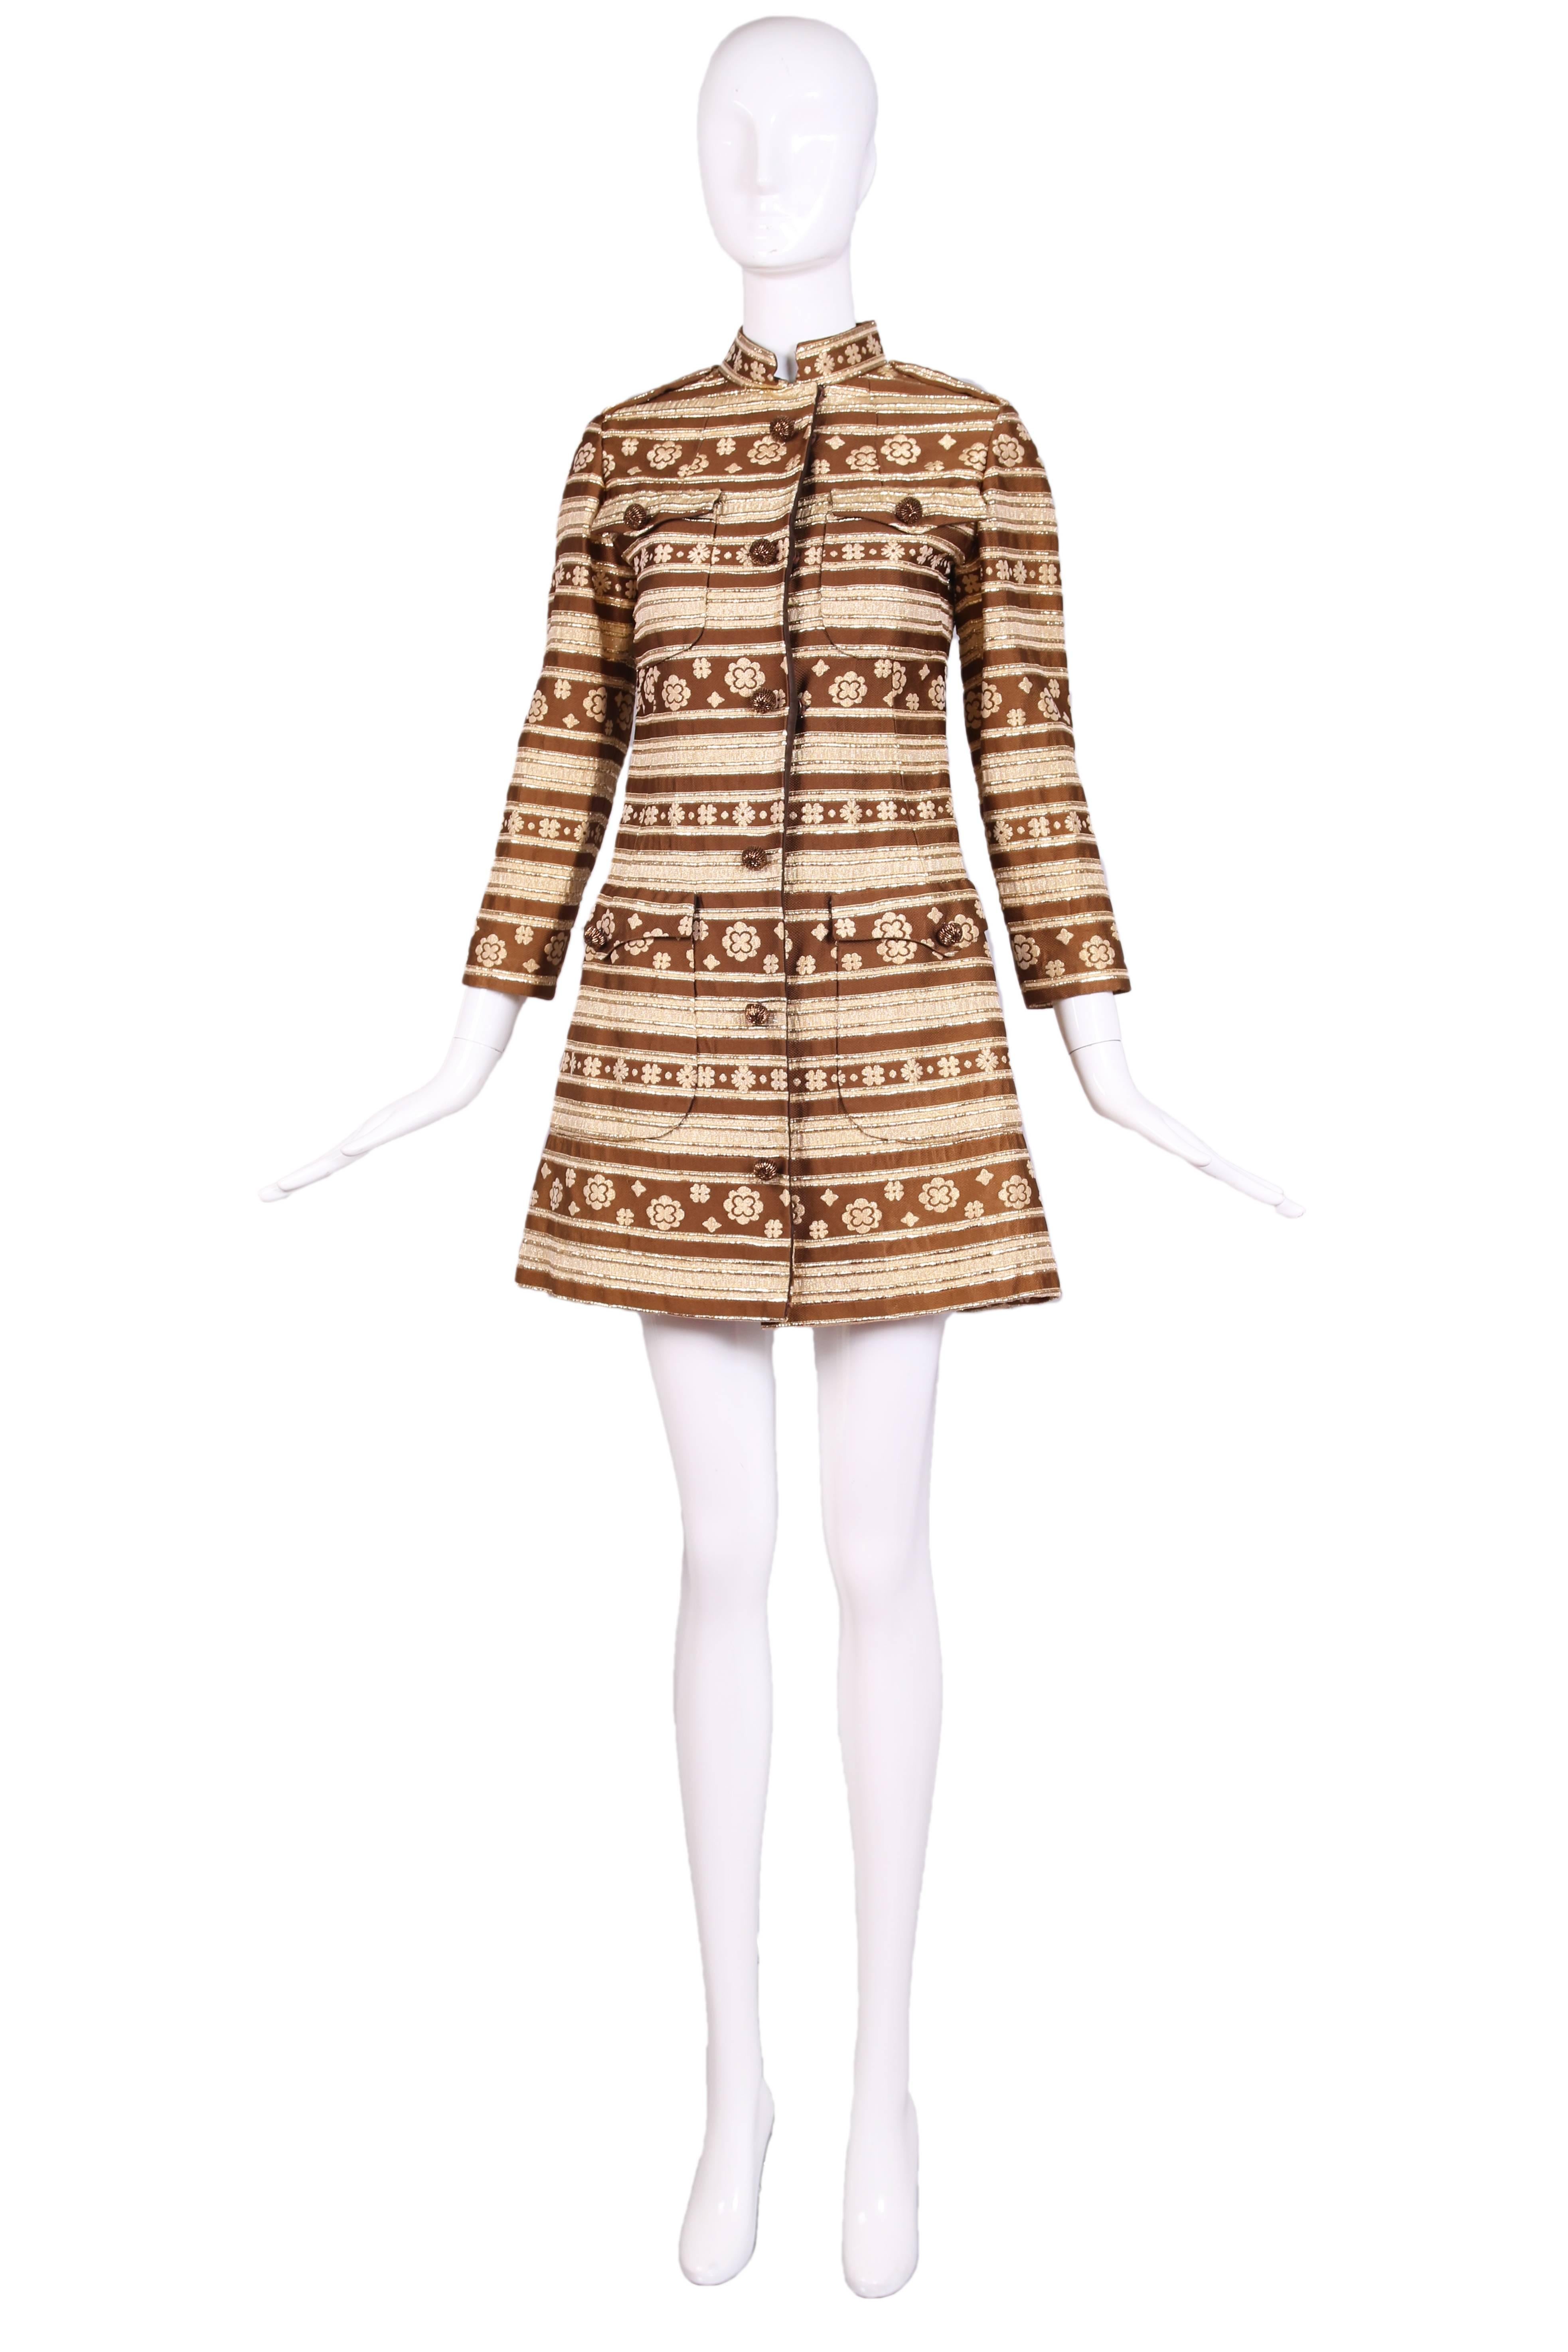 1960's Bill Blass for Maurice Rentner brown and gold lurex stripped coat with bronze beaded decorative buttons.  Snap closure and four front patch pockets. In excellent condition. No size tag, please consult measurements.
MEASUREMENTS:
Bust -